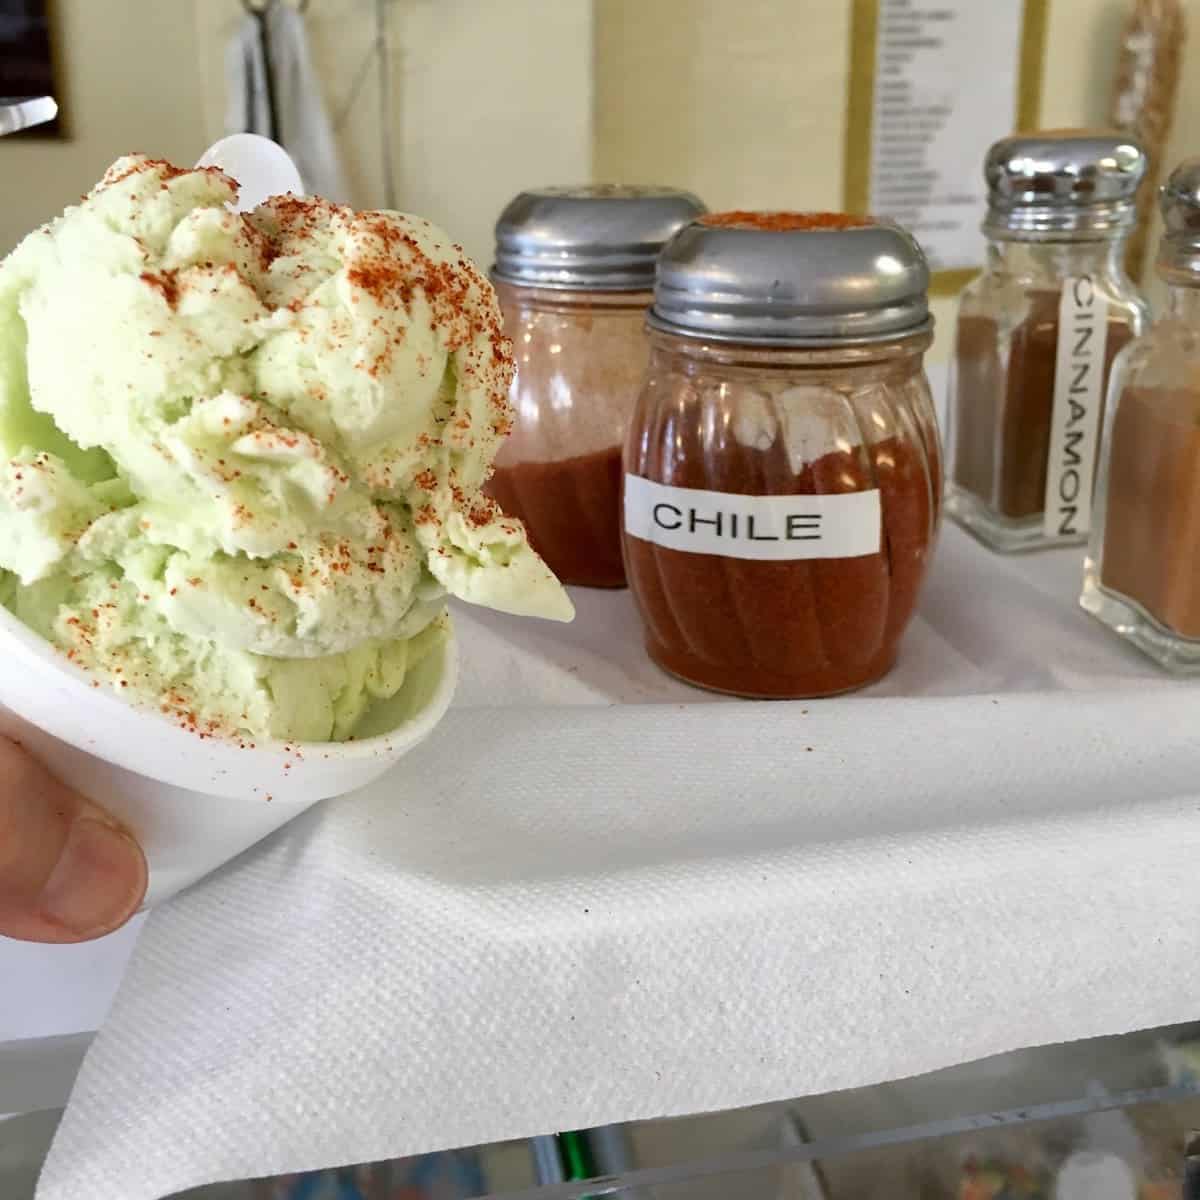 At the ice cream parlor with avocado ice cream topped with chili powder.